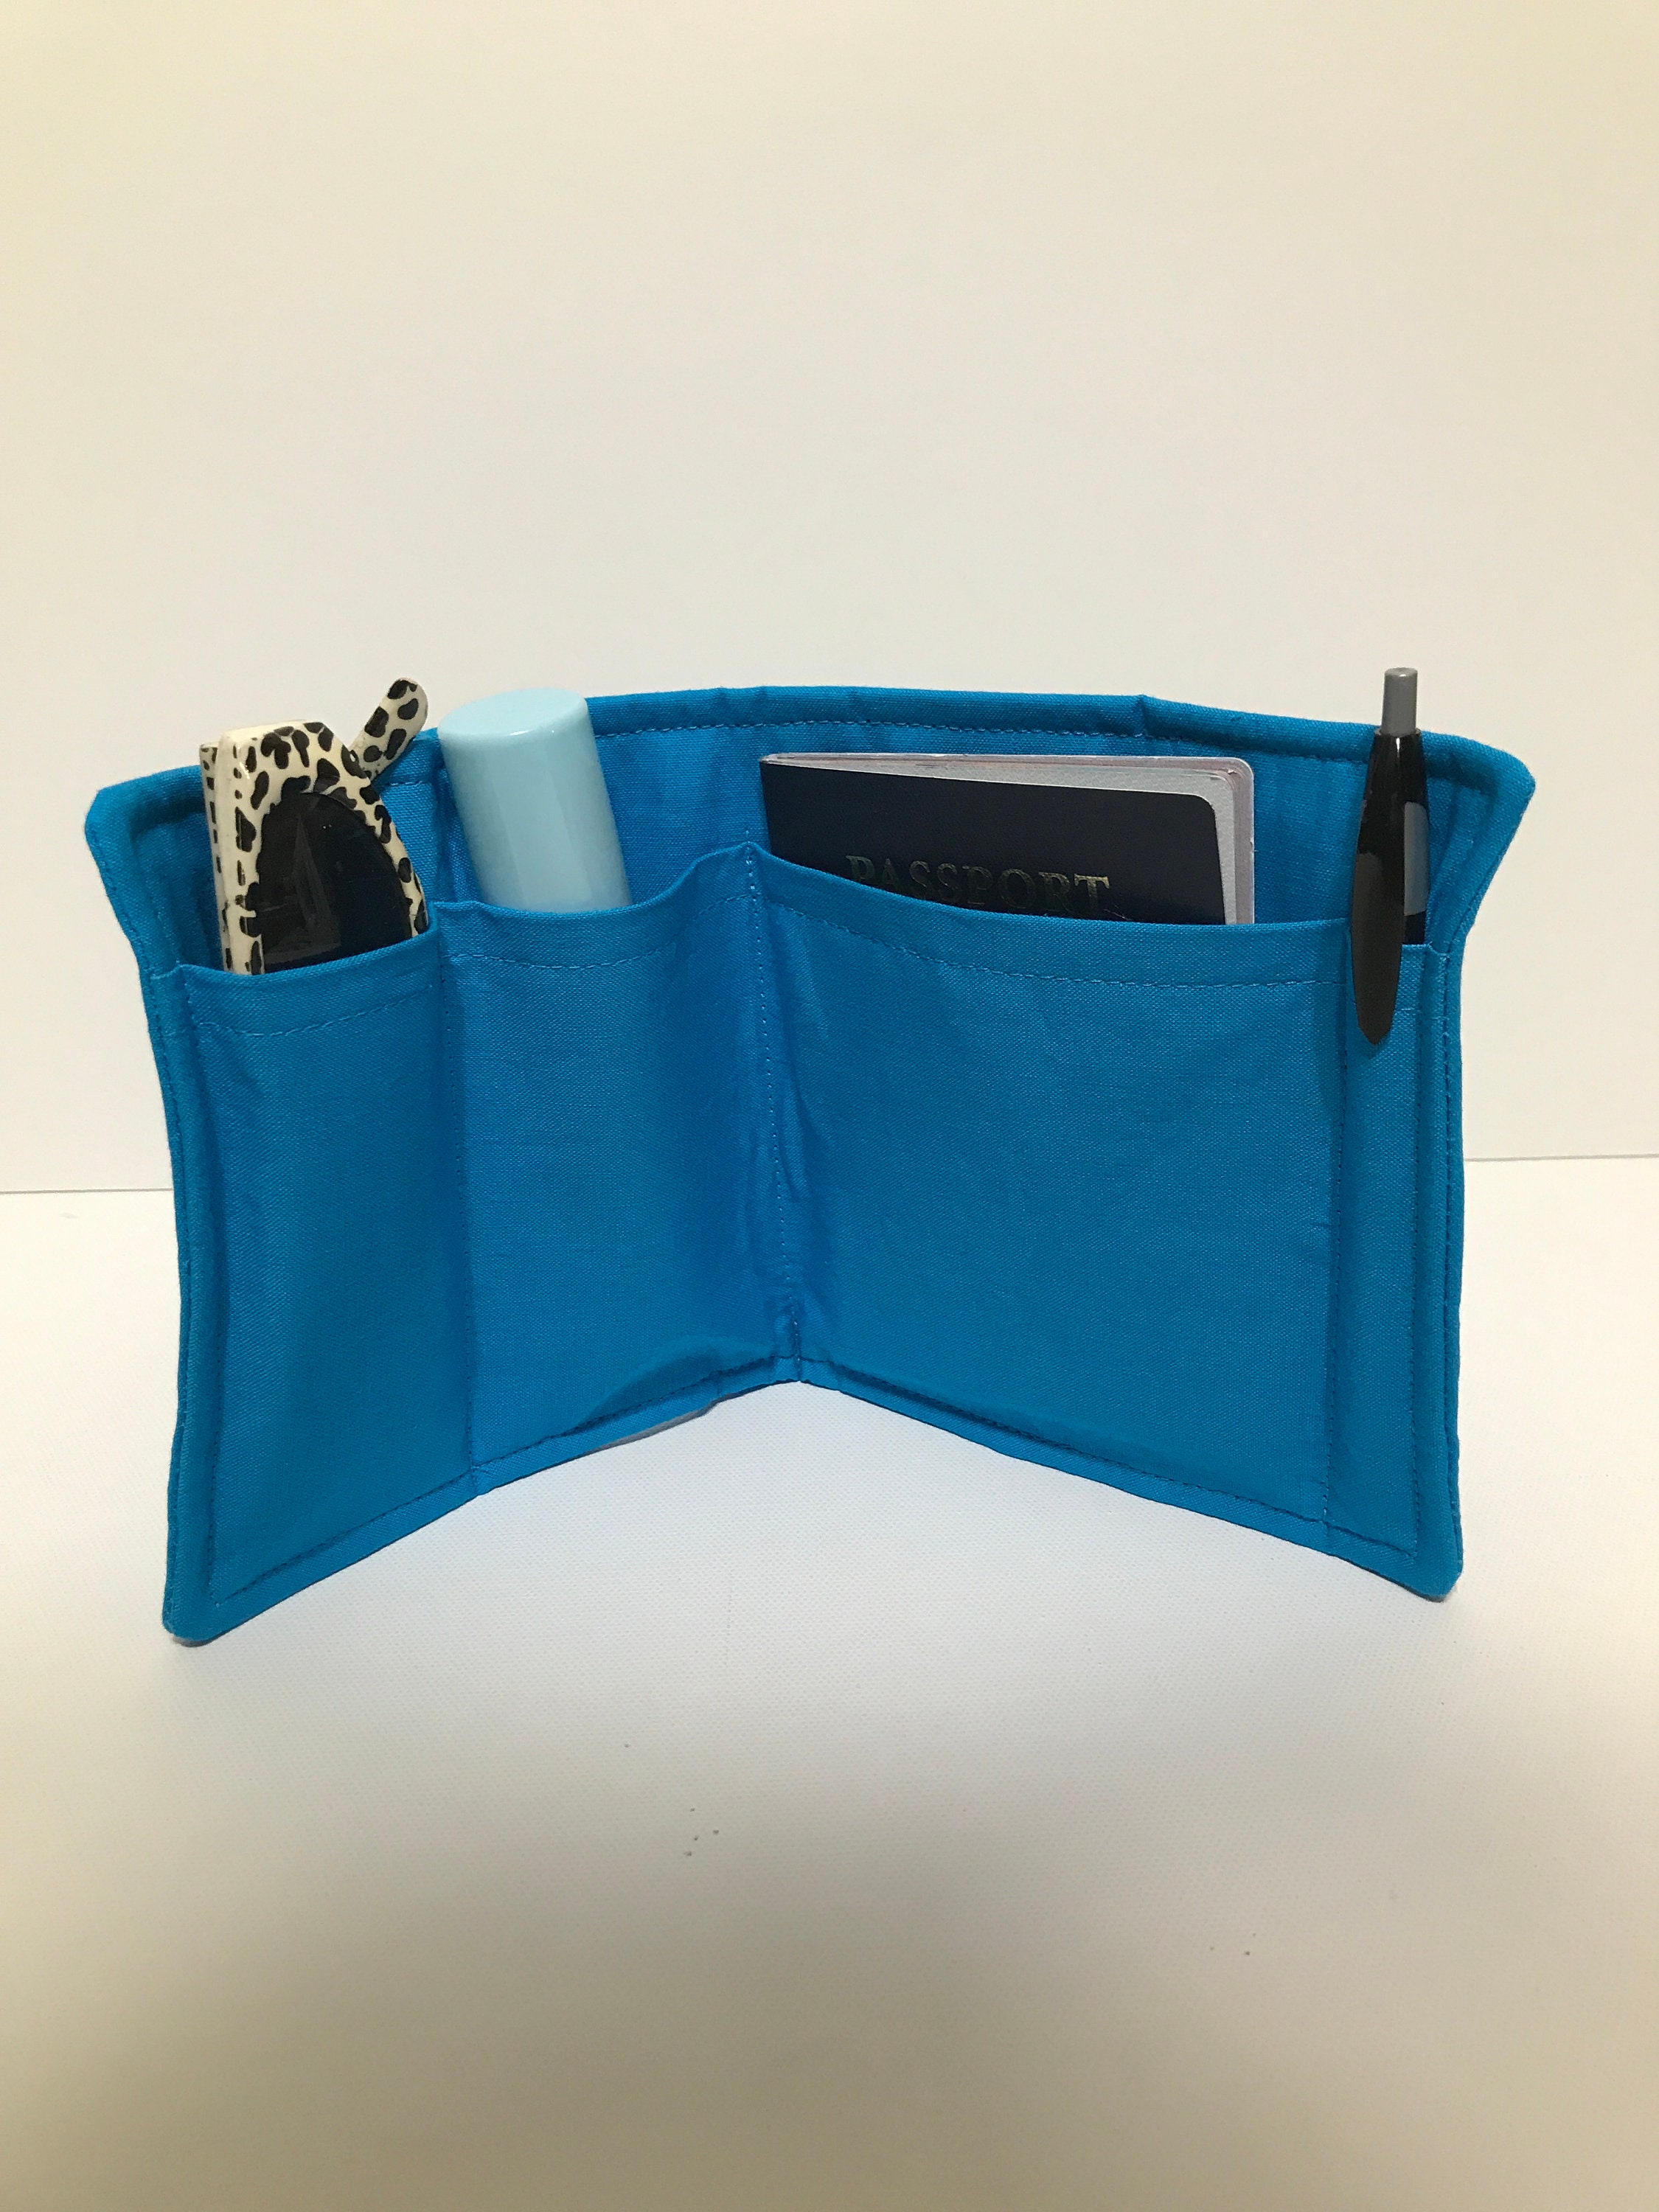 Extra Large Size Purse Organizer With Laptop Padded Case Bag Organizer  Insert in Peacock Fabric 